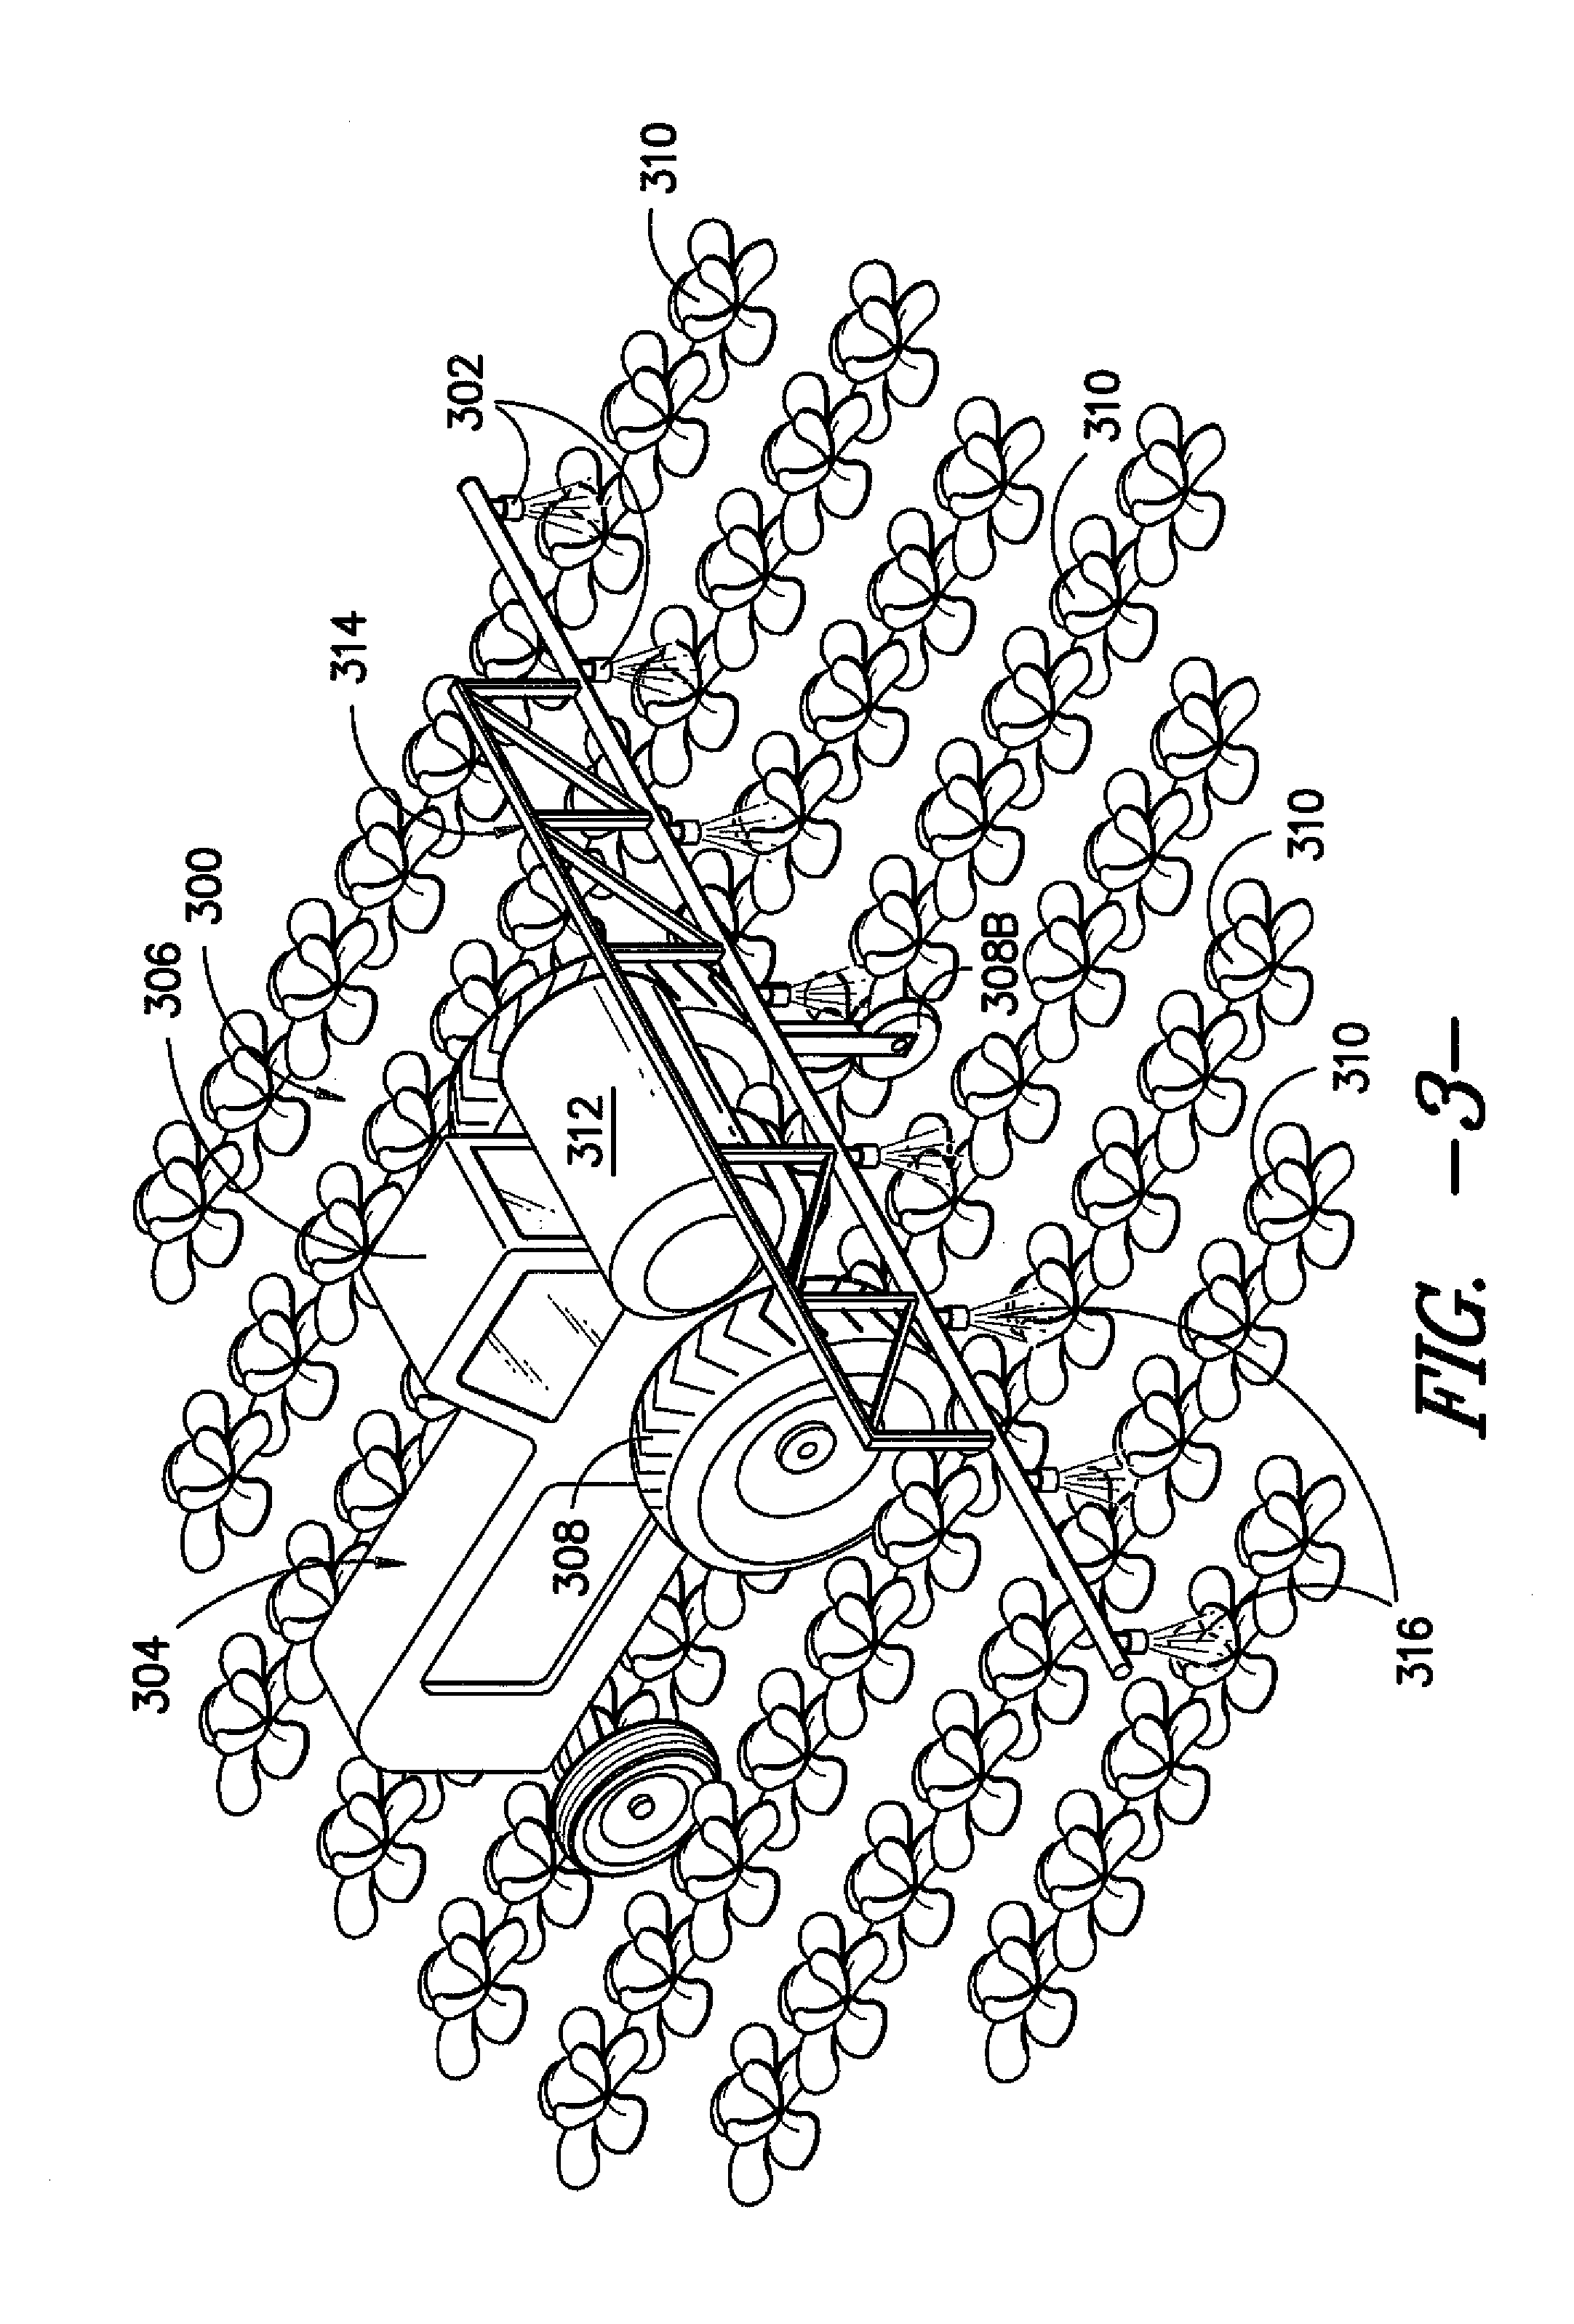 Electrically actuated valve for control of instantaneous pressure drop and cyclic durations of flow